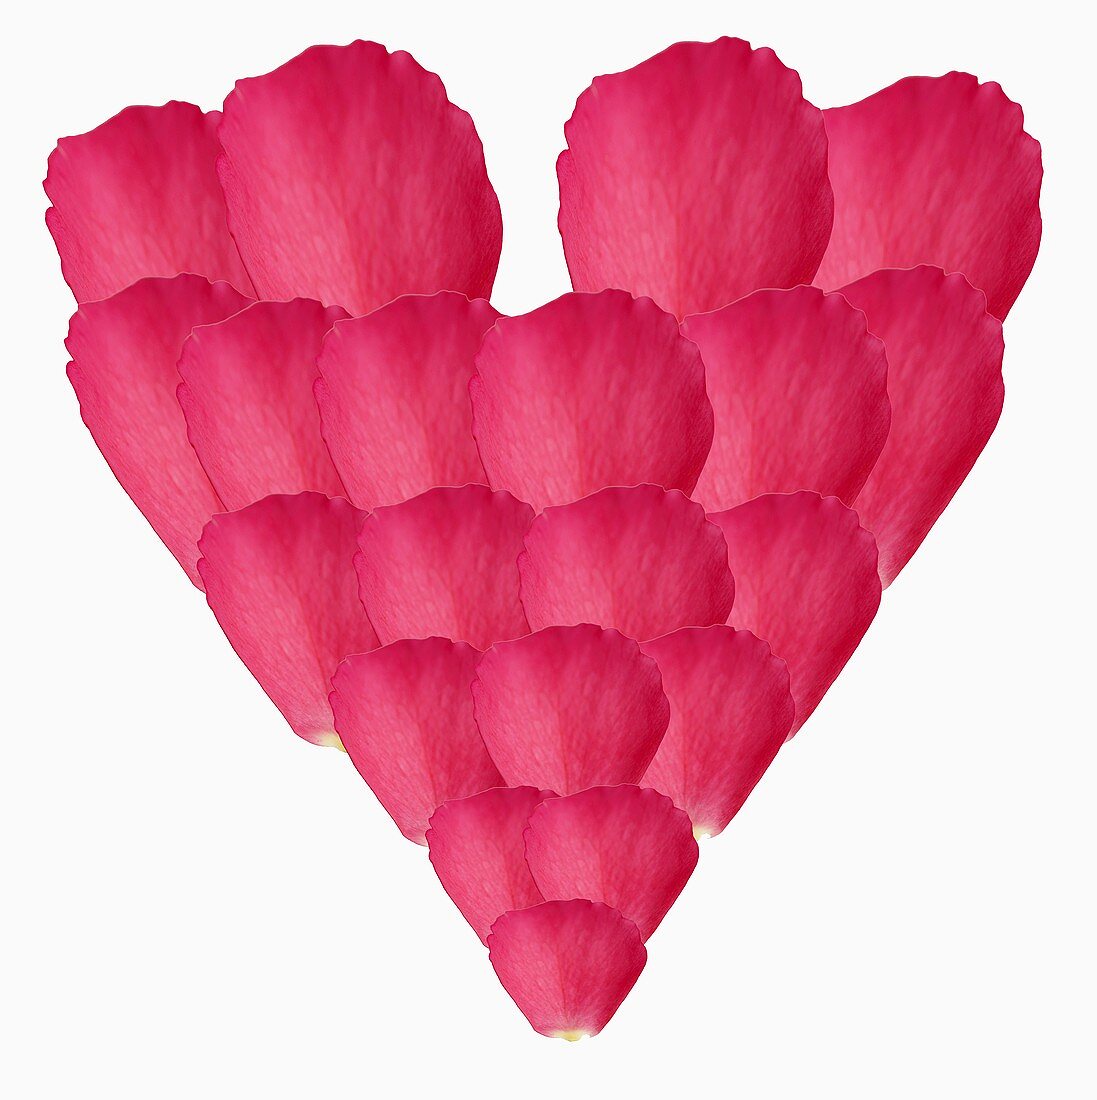 Heart made from pink rose petals